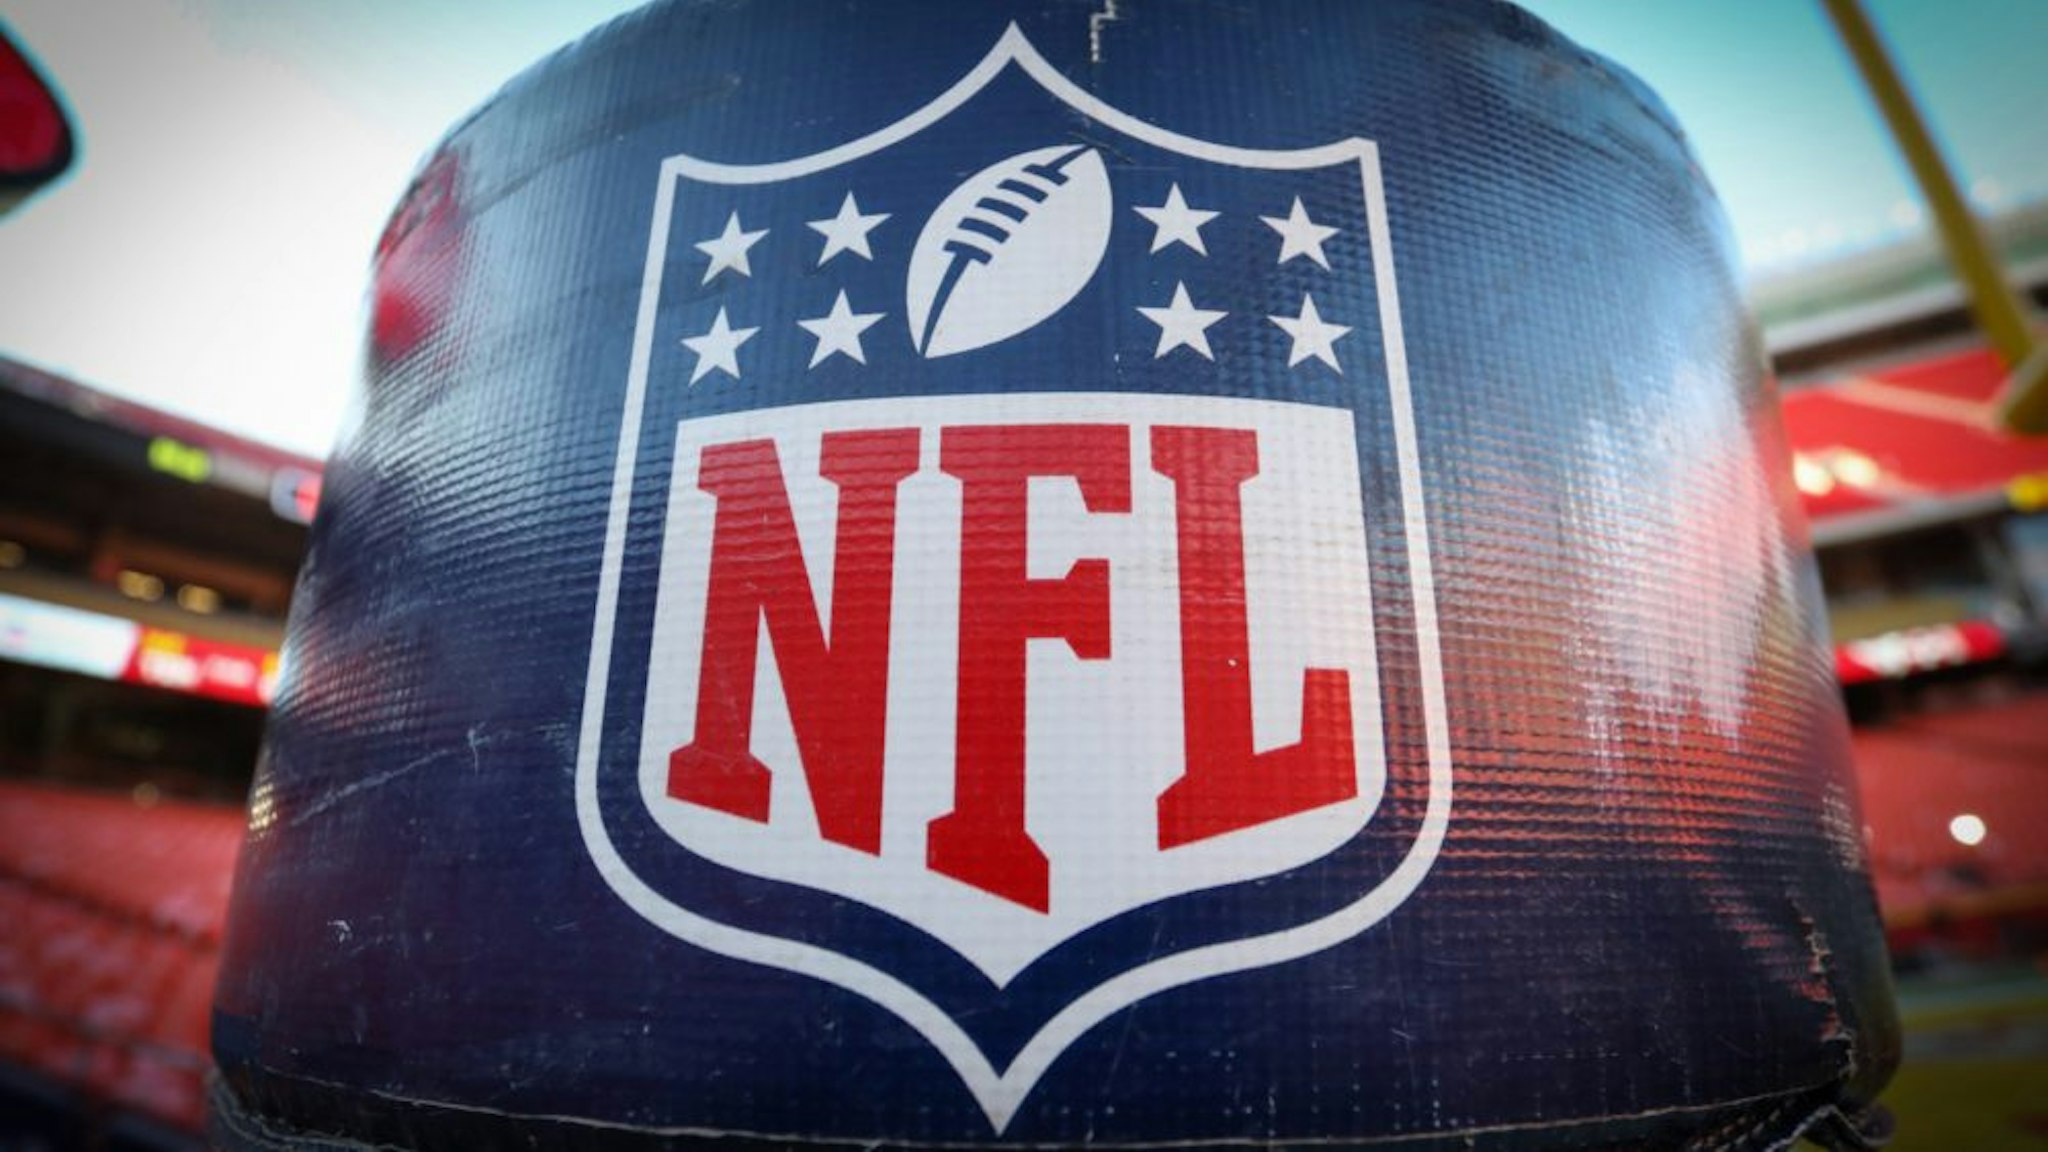 A view of the NFL logo before the AFC Championship game between the Tennessee Titans and Kansas City Chiefs on January 19, 2020 at Arrowhead Stadium in Kansas City, MO.